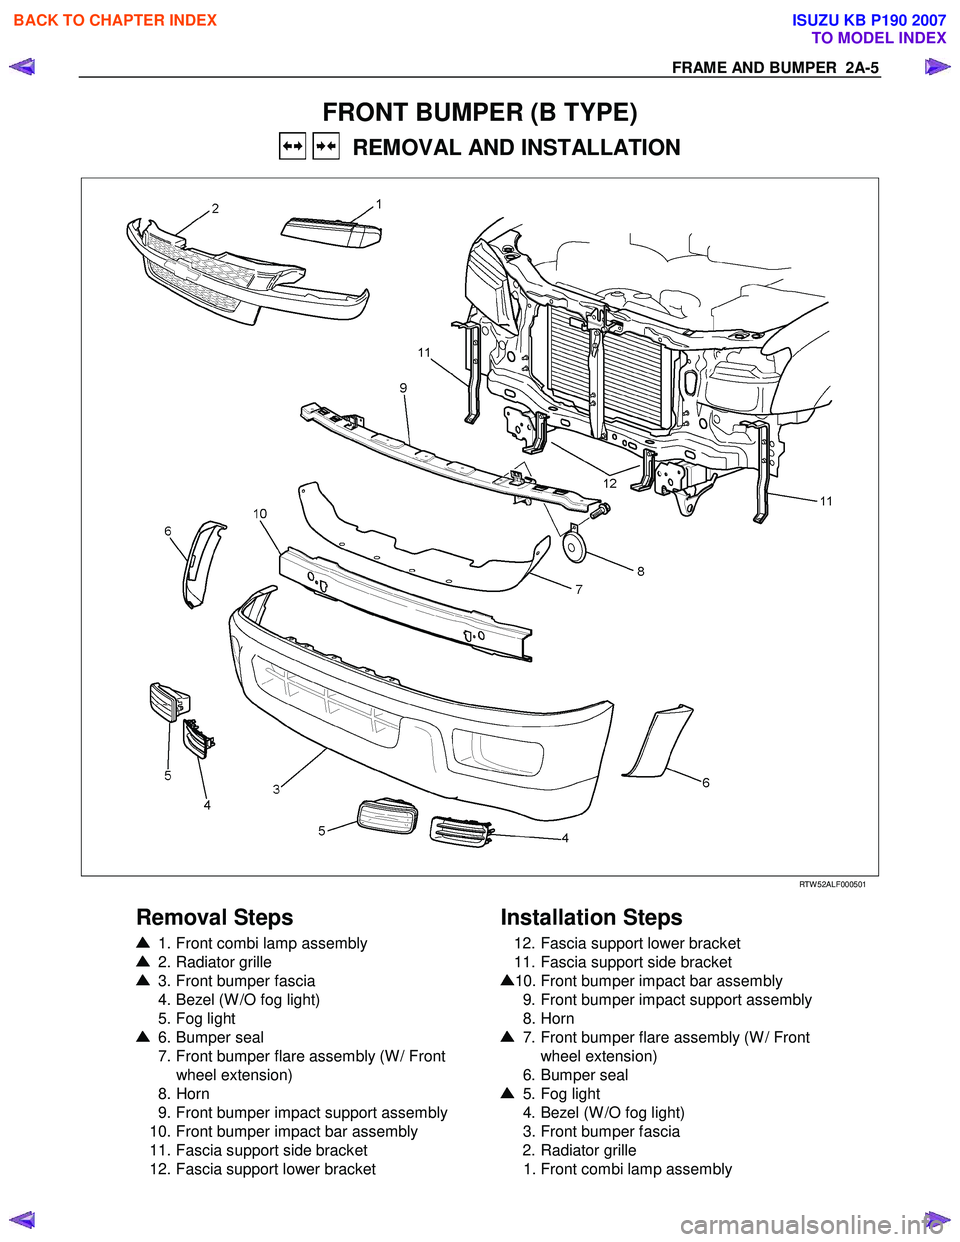 ISUZU KB P190 2007  Workshop Repair Manual FRAME AND BUMPER  2A-5 
FRONT BUMPER (B TYPE) 
   REMOVAL AND INSTALLATION 
  
 
 RTW 52ALF000501 
 
Removal Steps   
  1. Front combi lamp assembly 
 2. Radiator grille  
 3. Front bumper fascia  
  